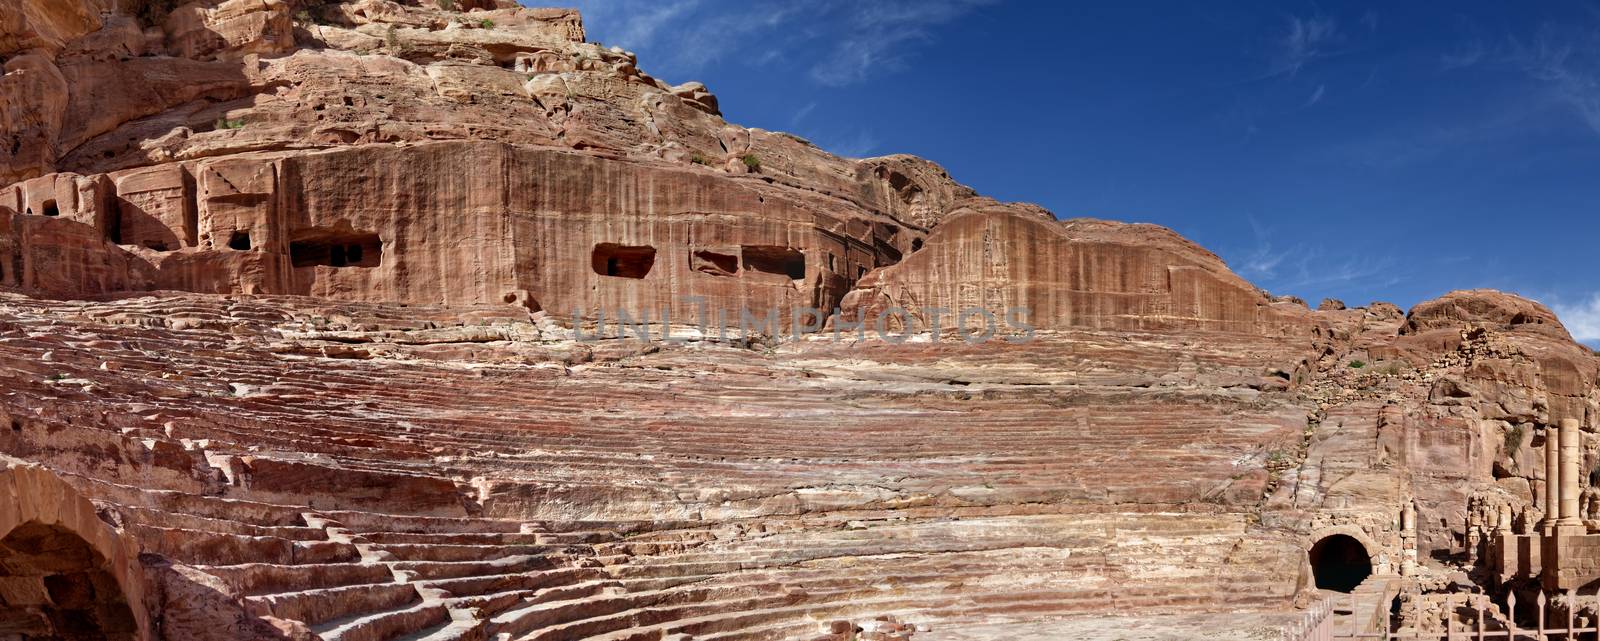 High-resolution panorama from the Nabataean amphitheatre in the rock town and necropolis of Petra by geogif